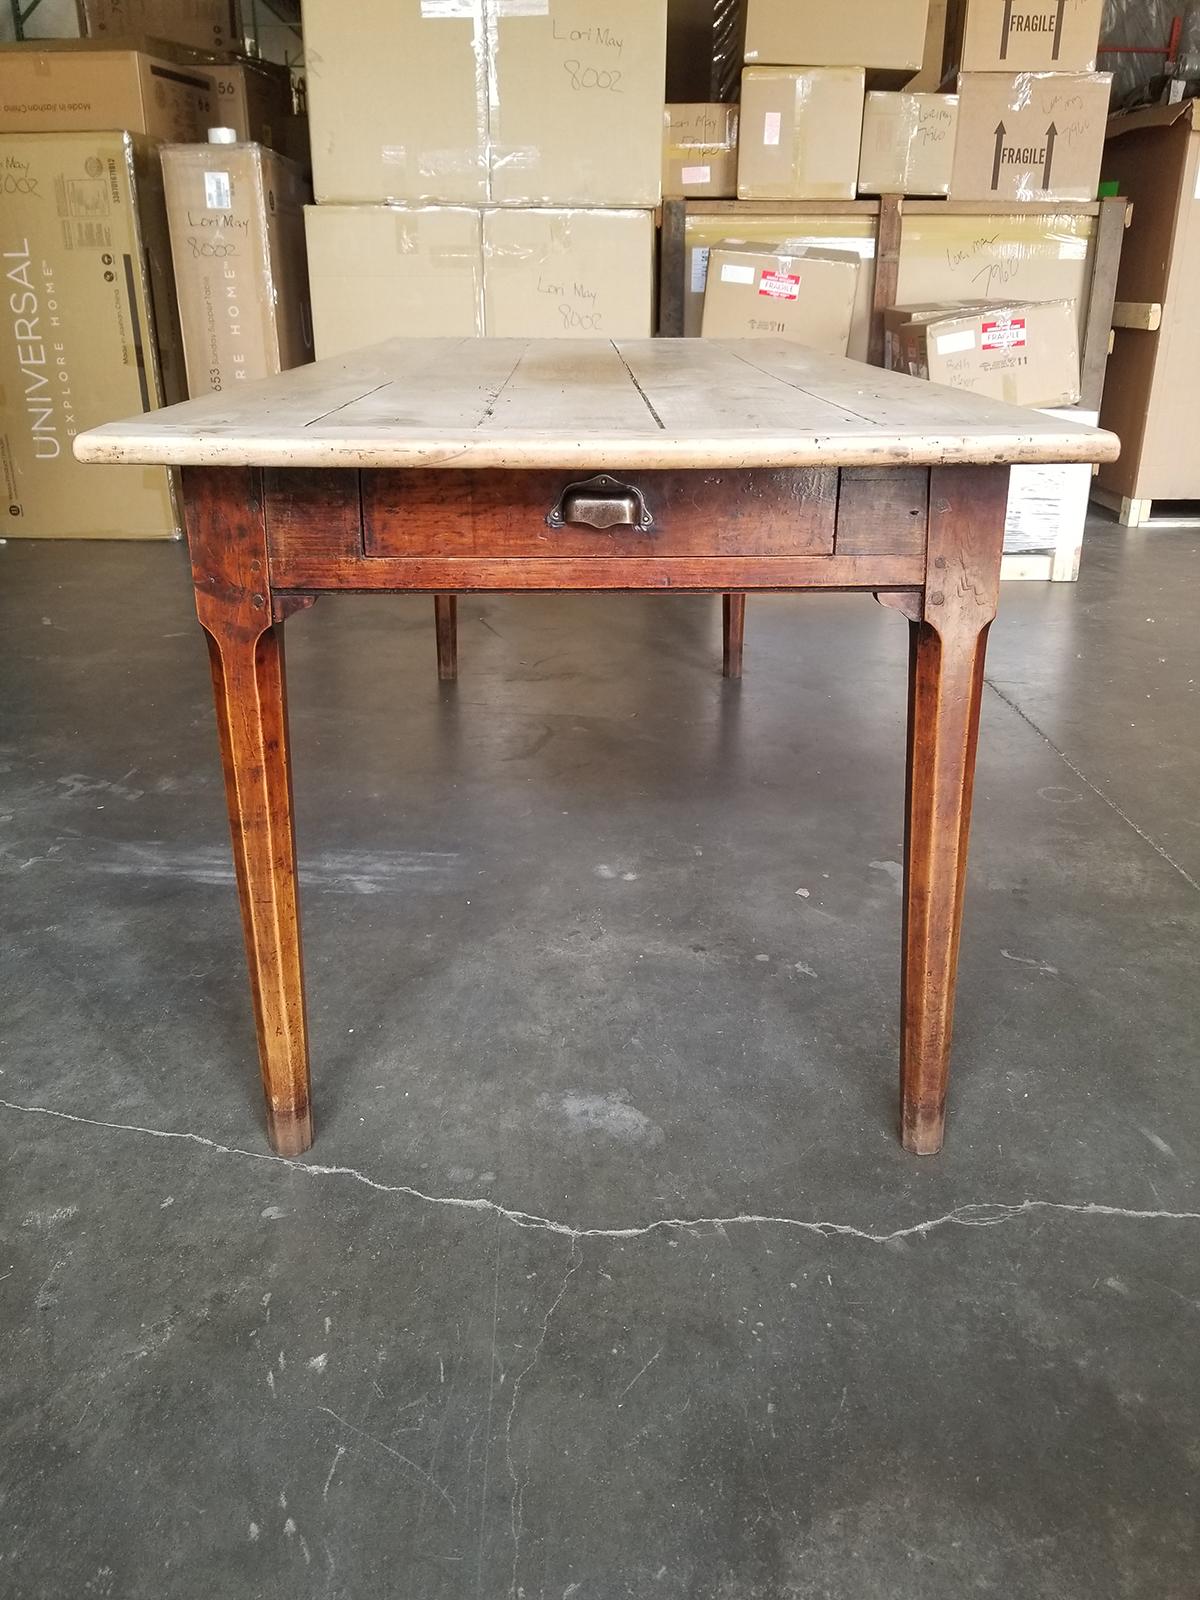 19th century pegged farm table with natural plank top, two utensil drawers.